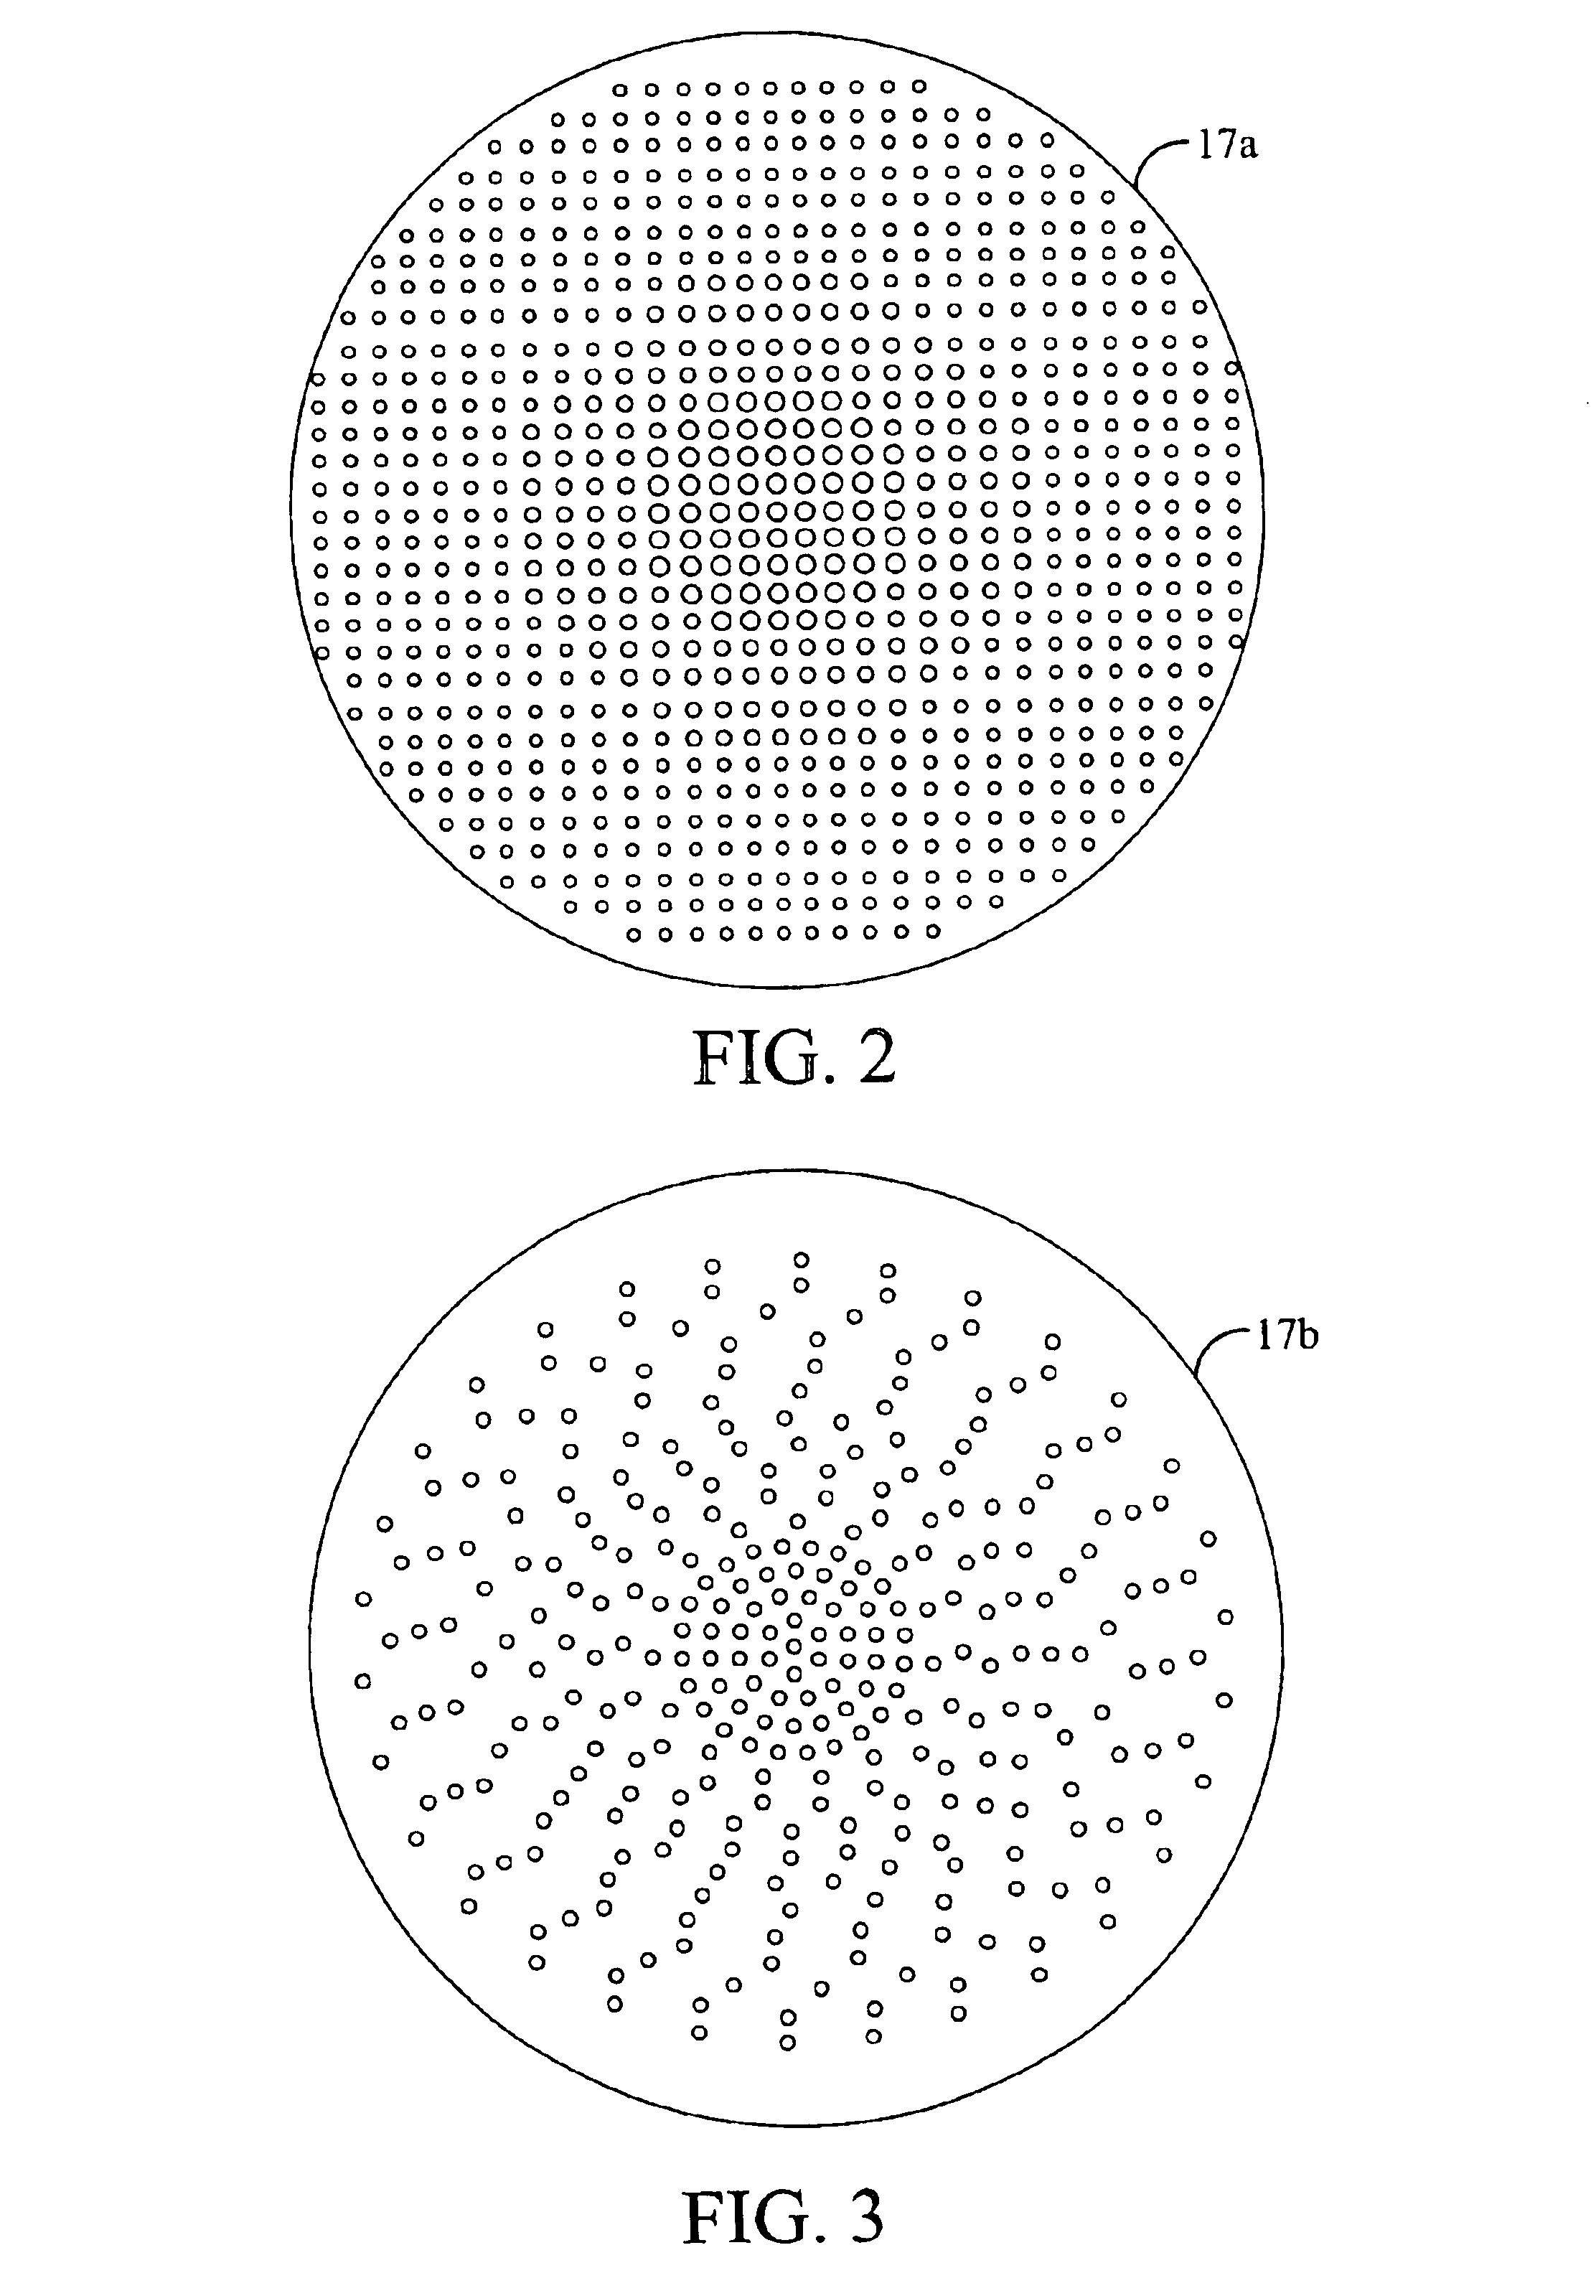 Apparatus and method for flow of process gas in an ultra-clean environment